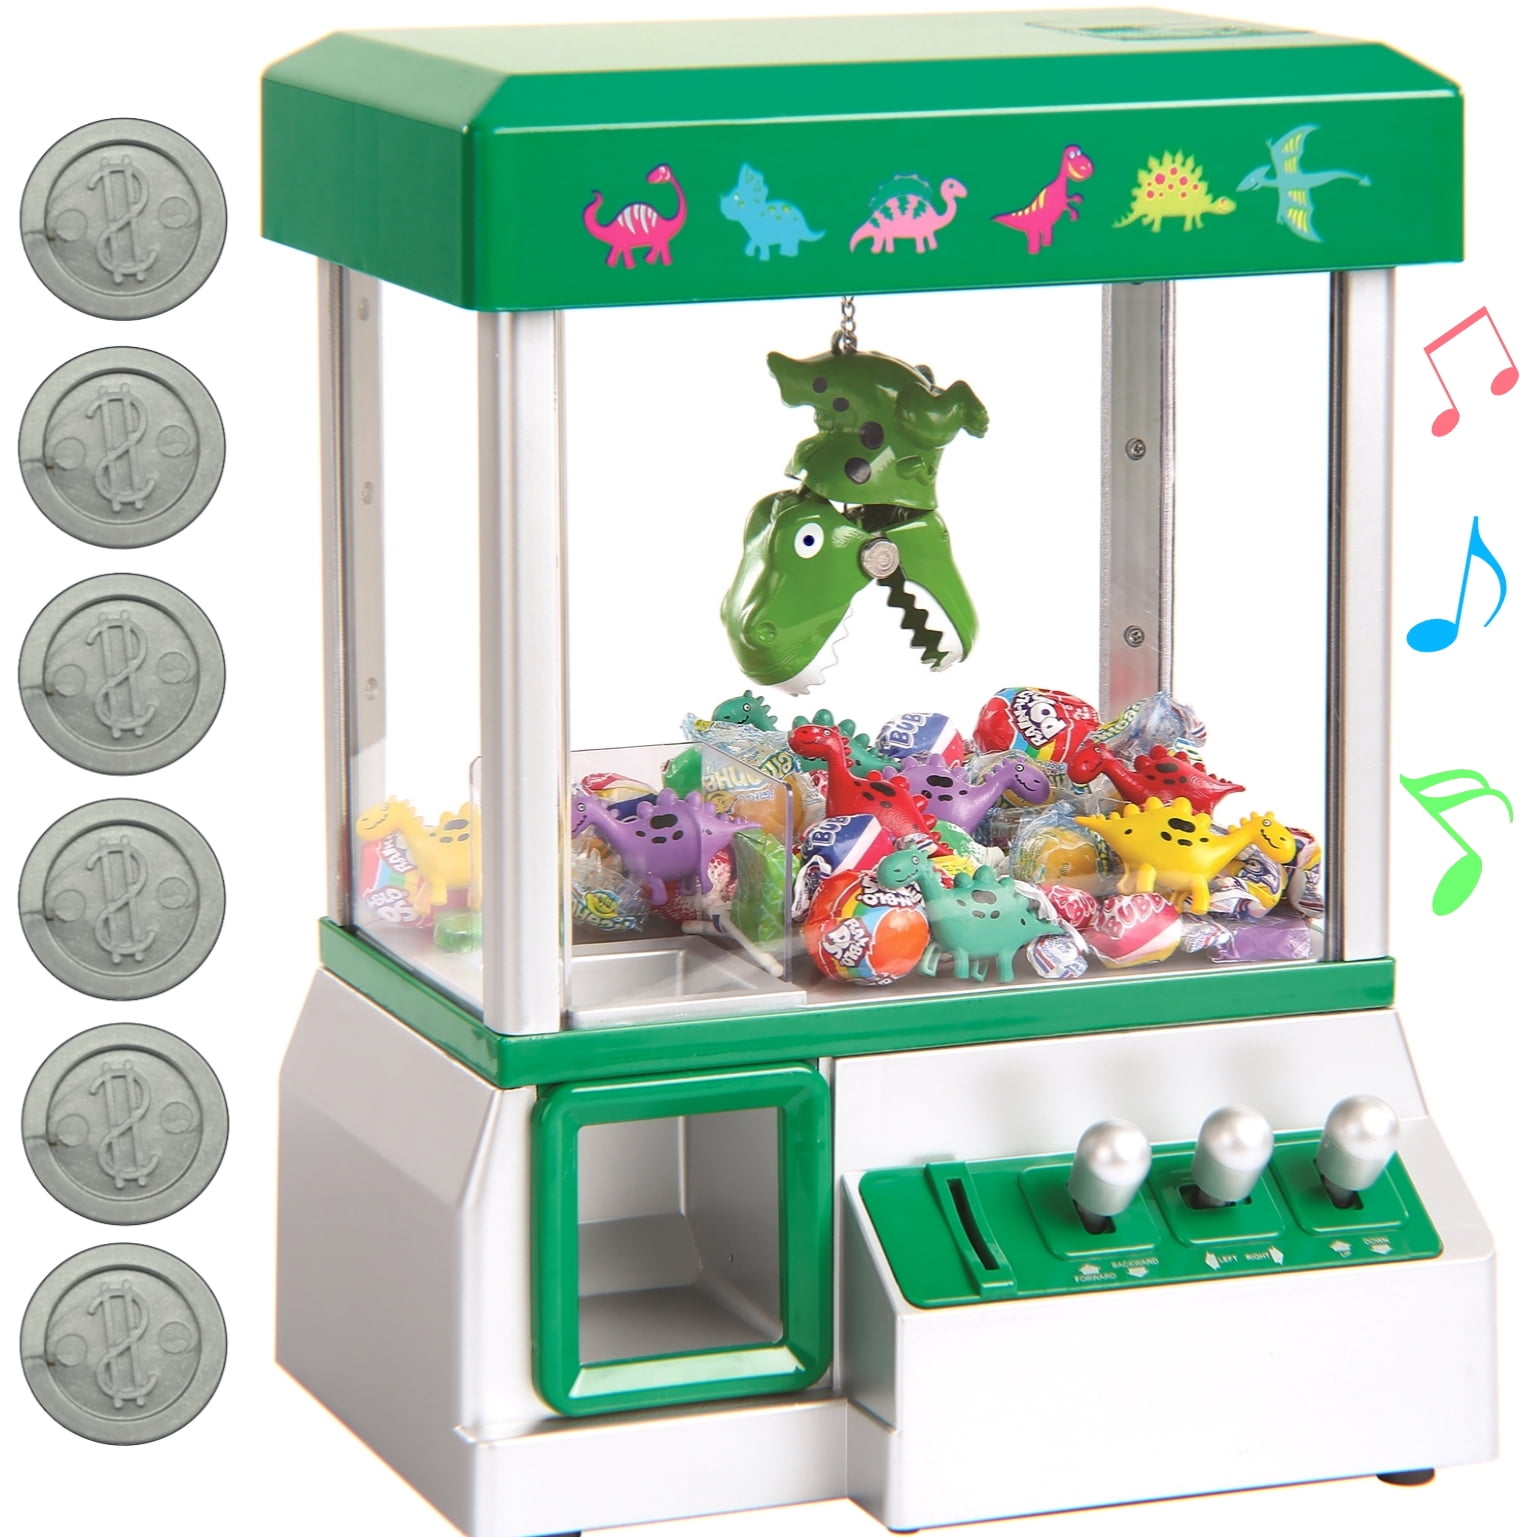 Bundaloo Slam Dunk Claw Machine 30 Reusable Tokens Party Game for Children Miniature Candy Grabber for Kids with 3 Small Basketballs Electronic Prize Dispenser Toy with Arcade Music 